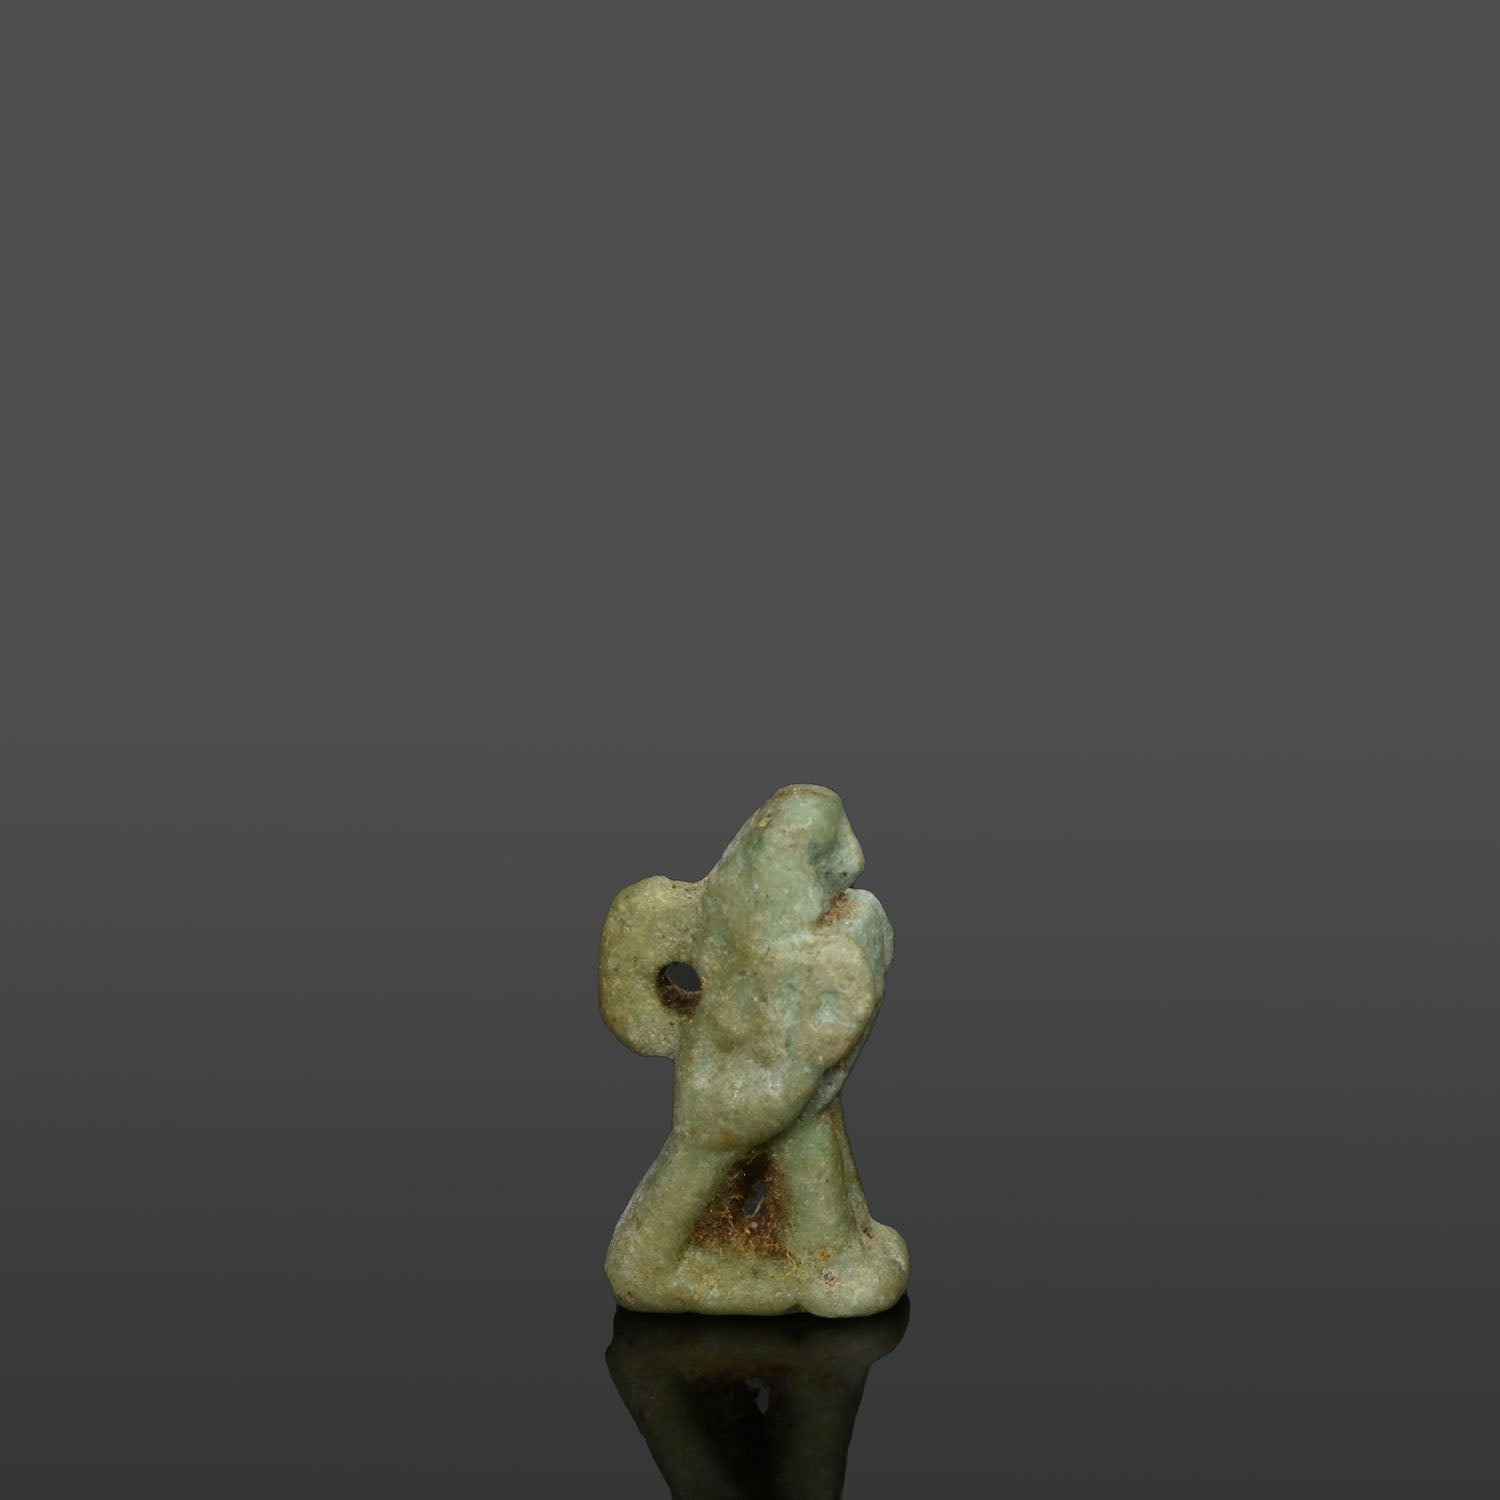 An Egyptian Green Faience Falcon Amulet, Late Period, ca. 664 - 332 BCE